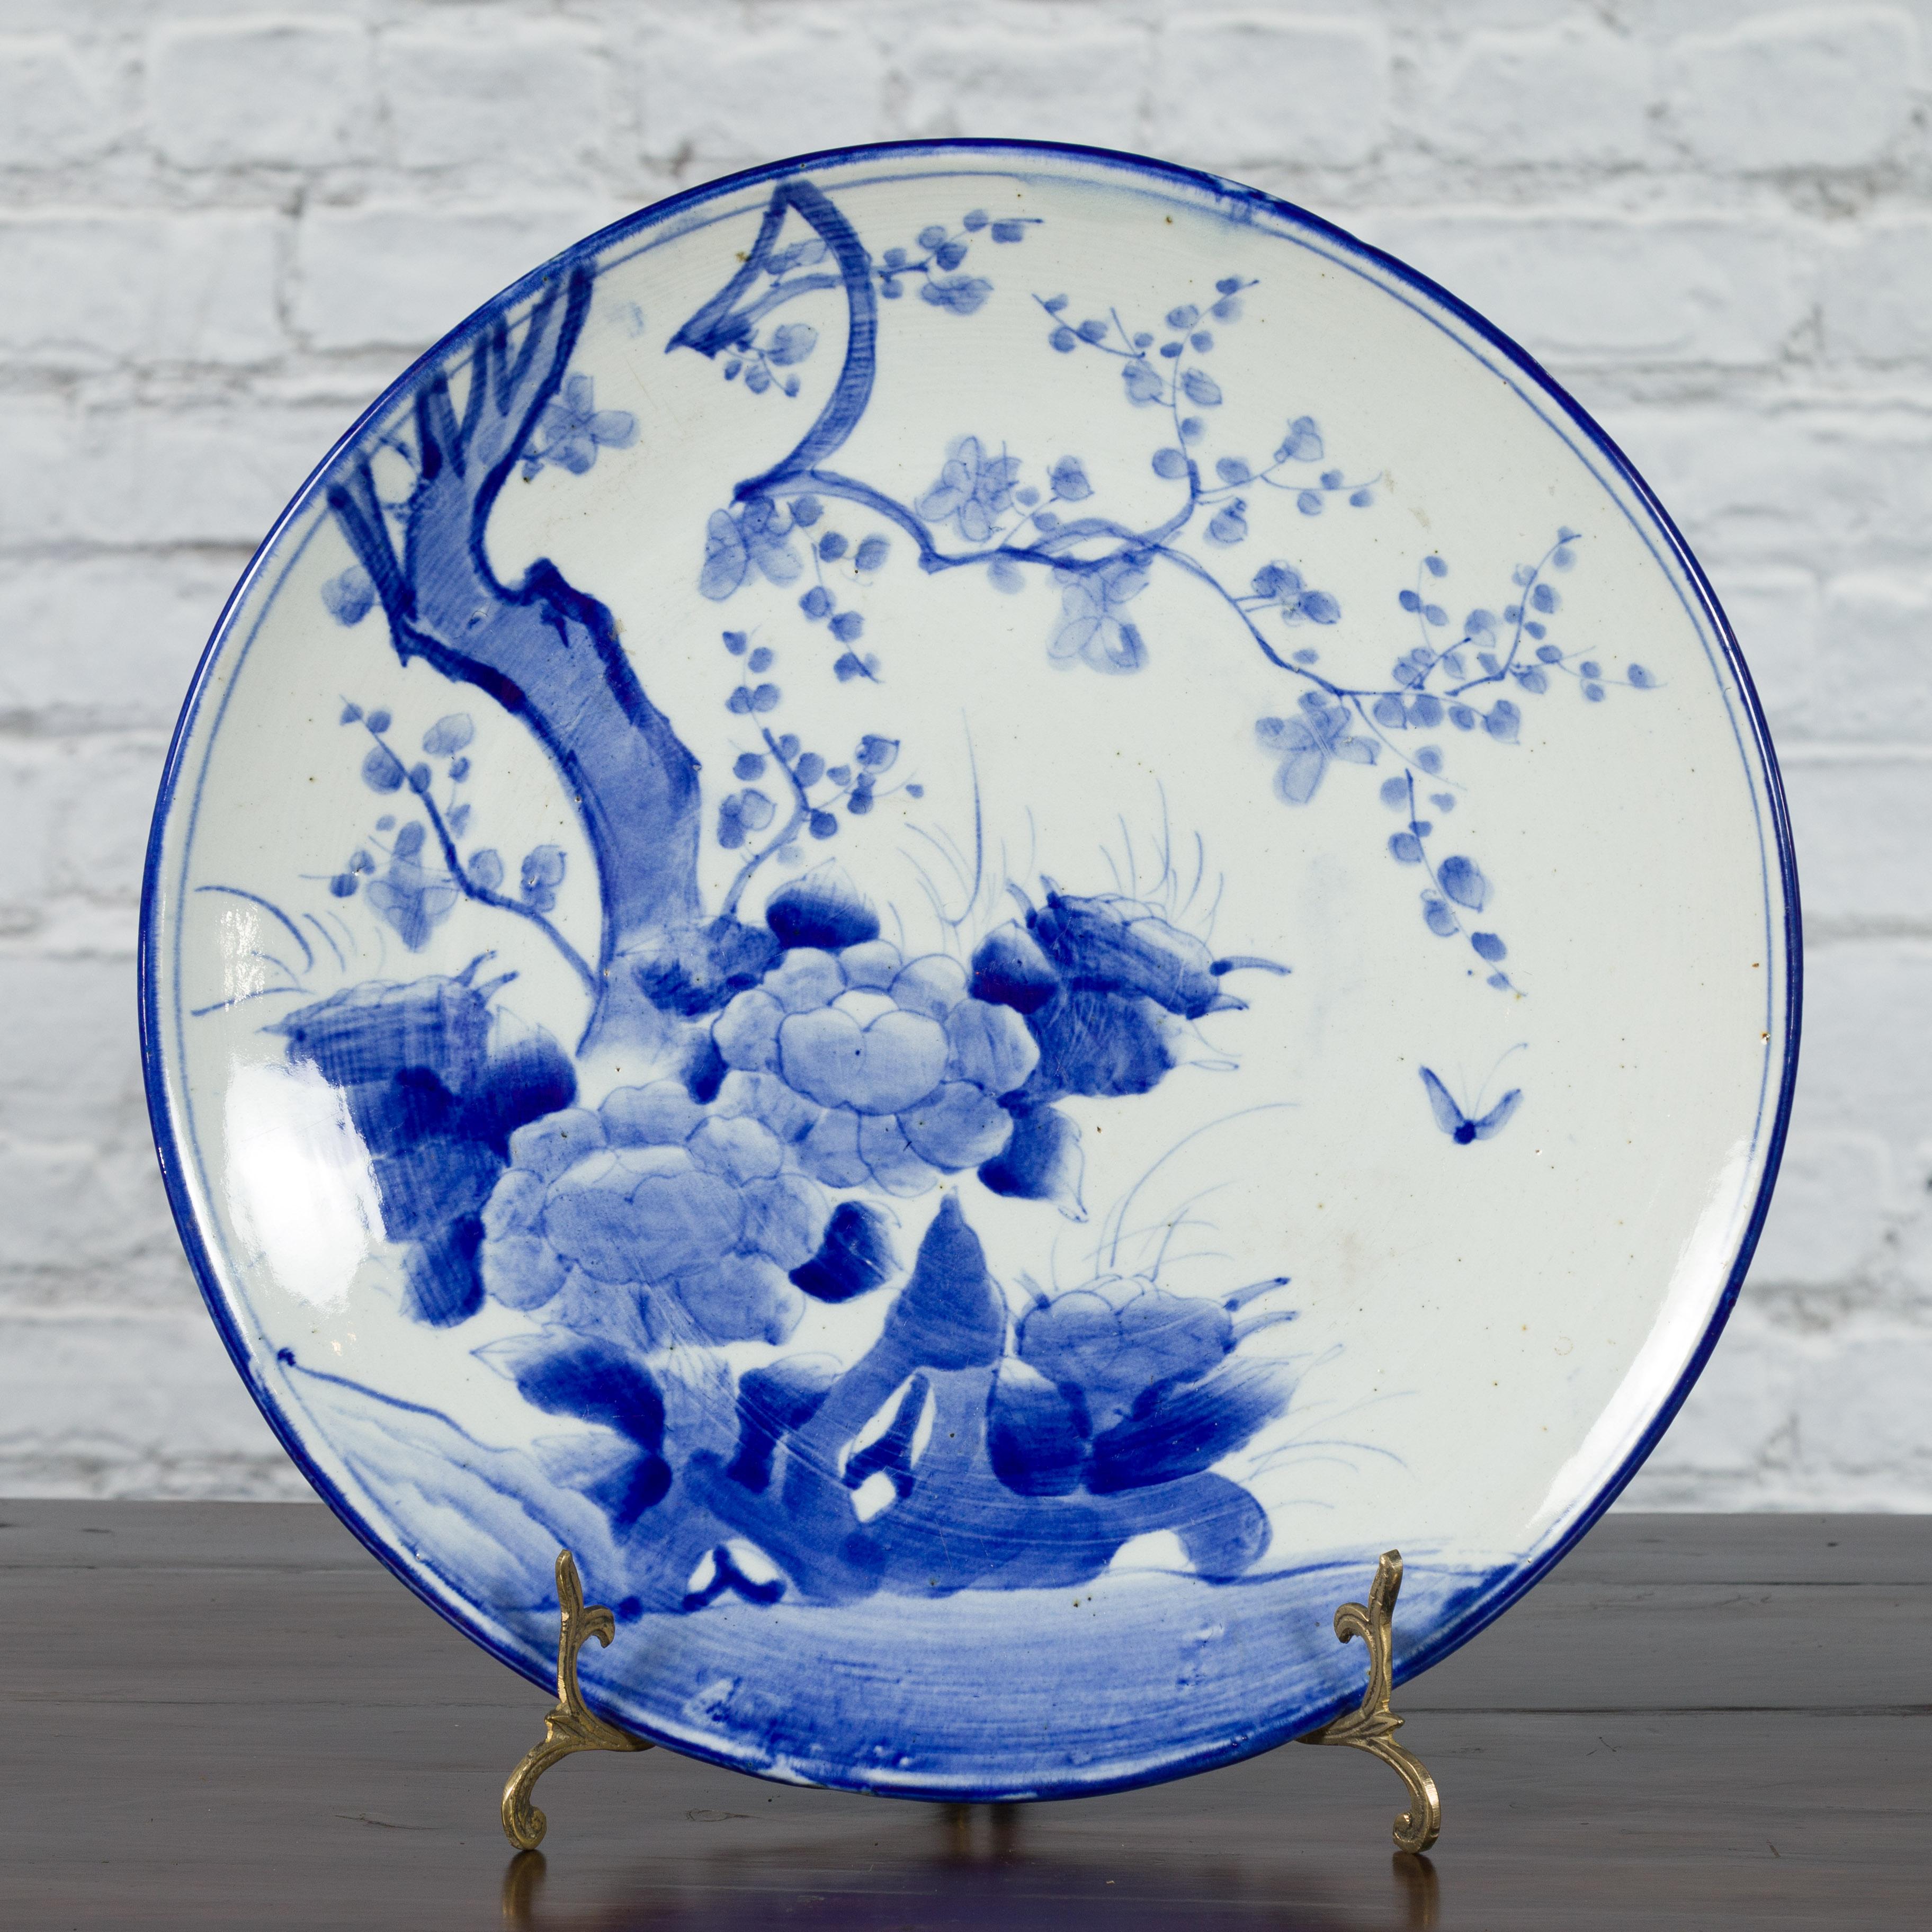 19th Century Japanese Porcelain Plate with Hand-Painted Blue and White Décor In Good Condition For Sale In Yonkers, NY